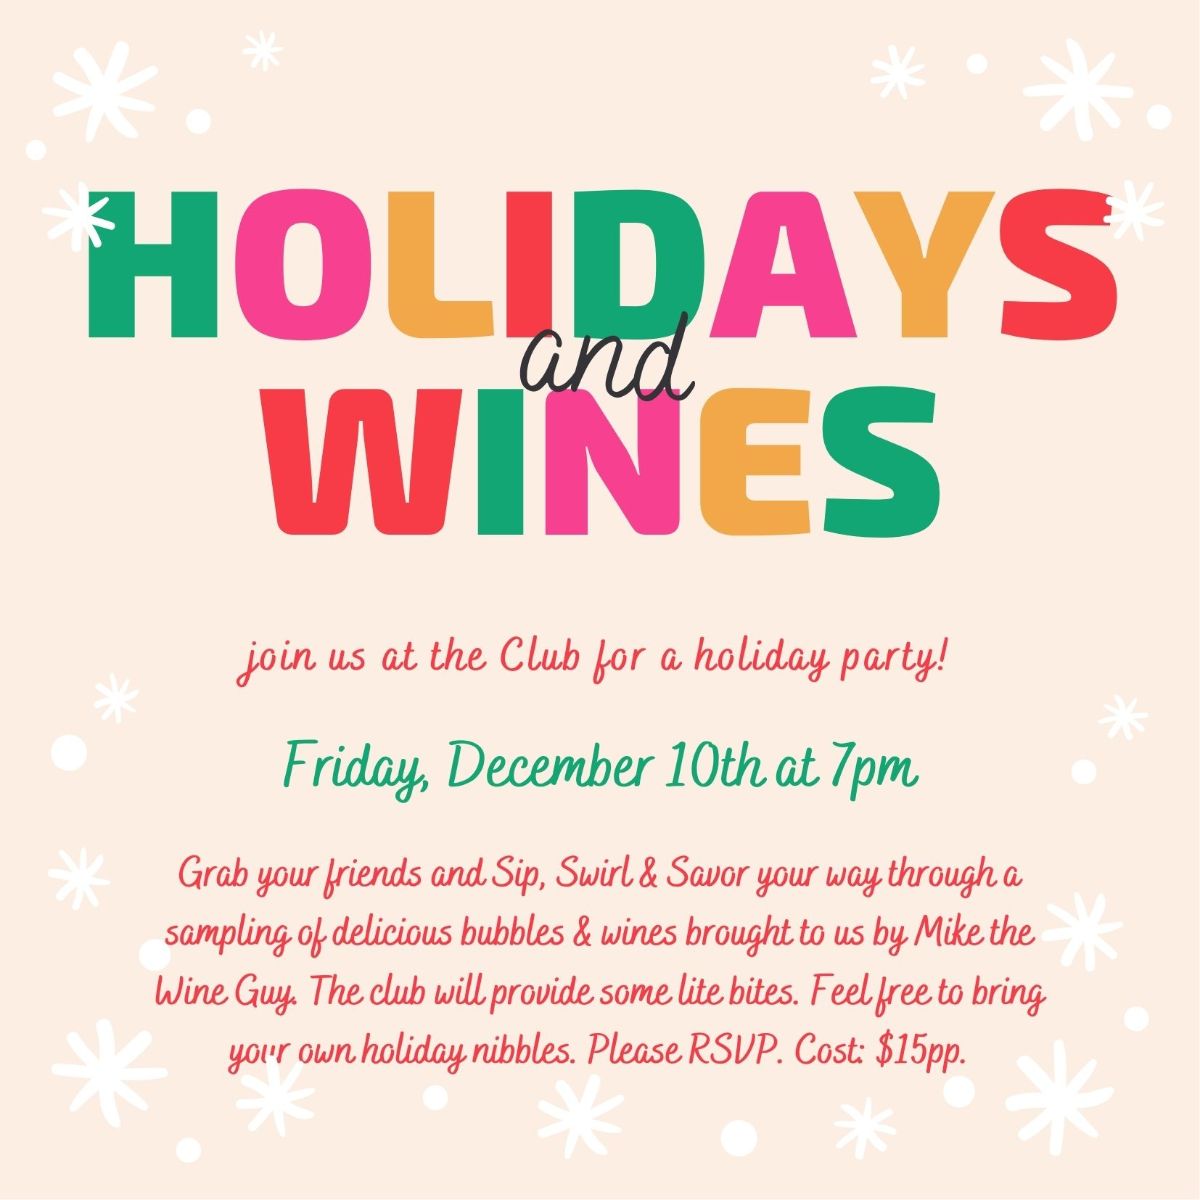 holidays and wines